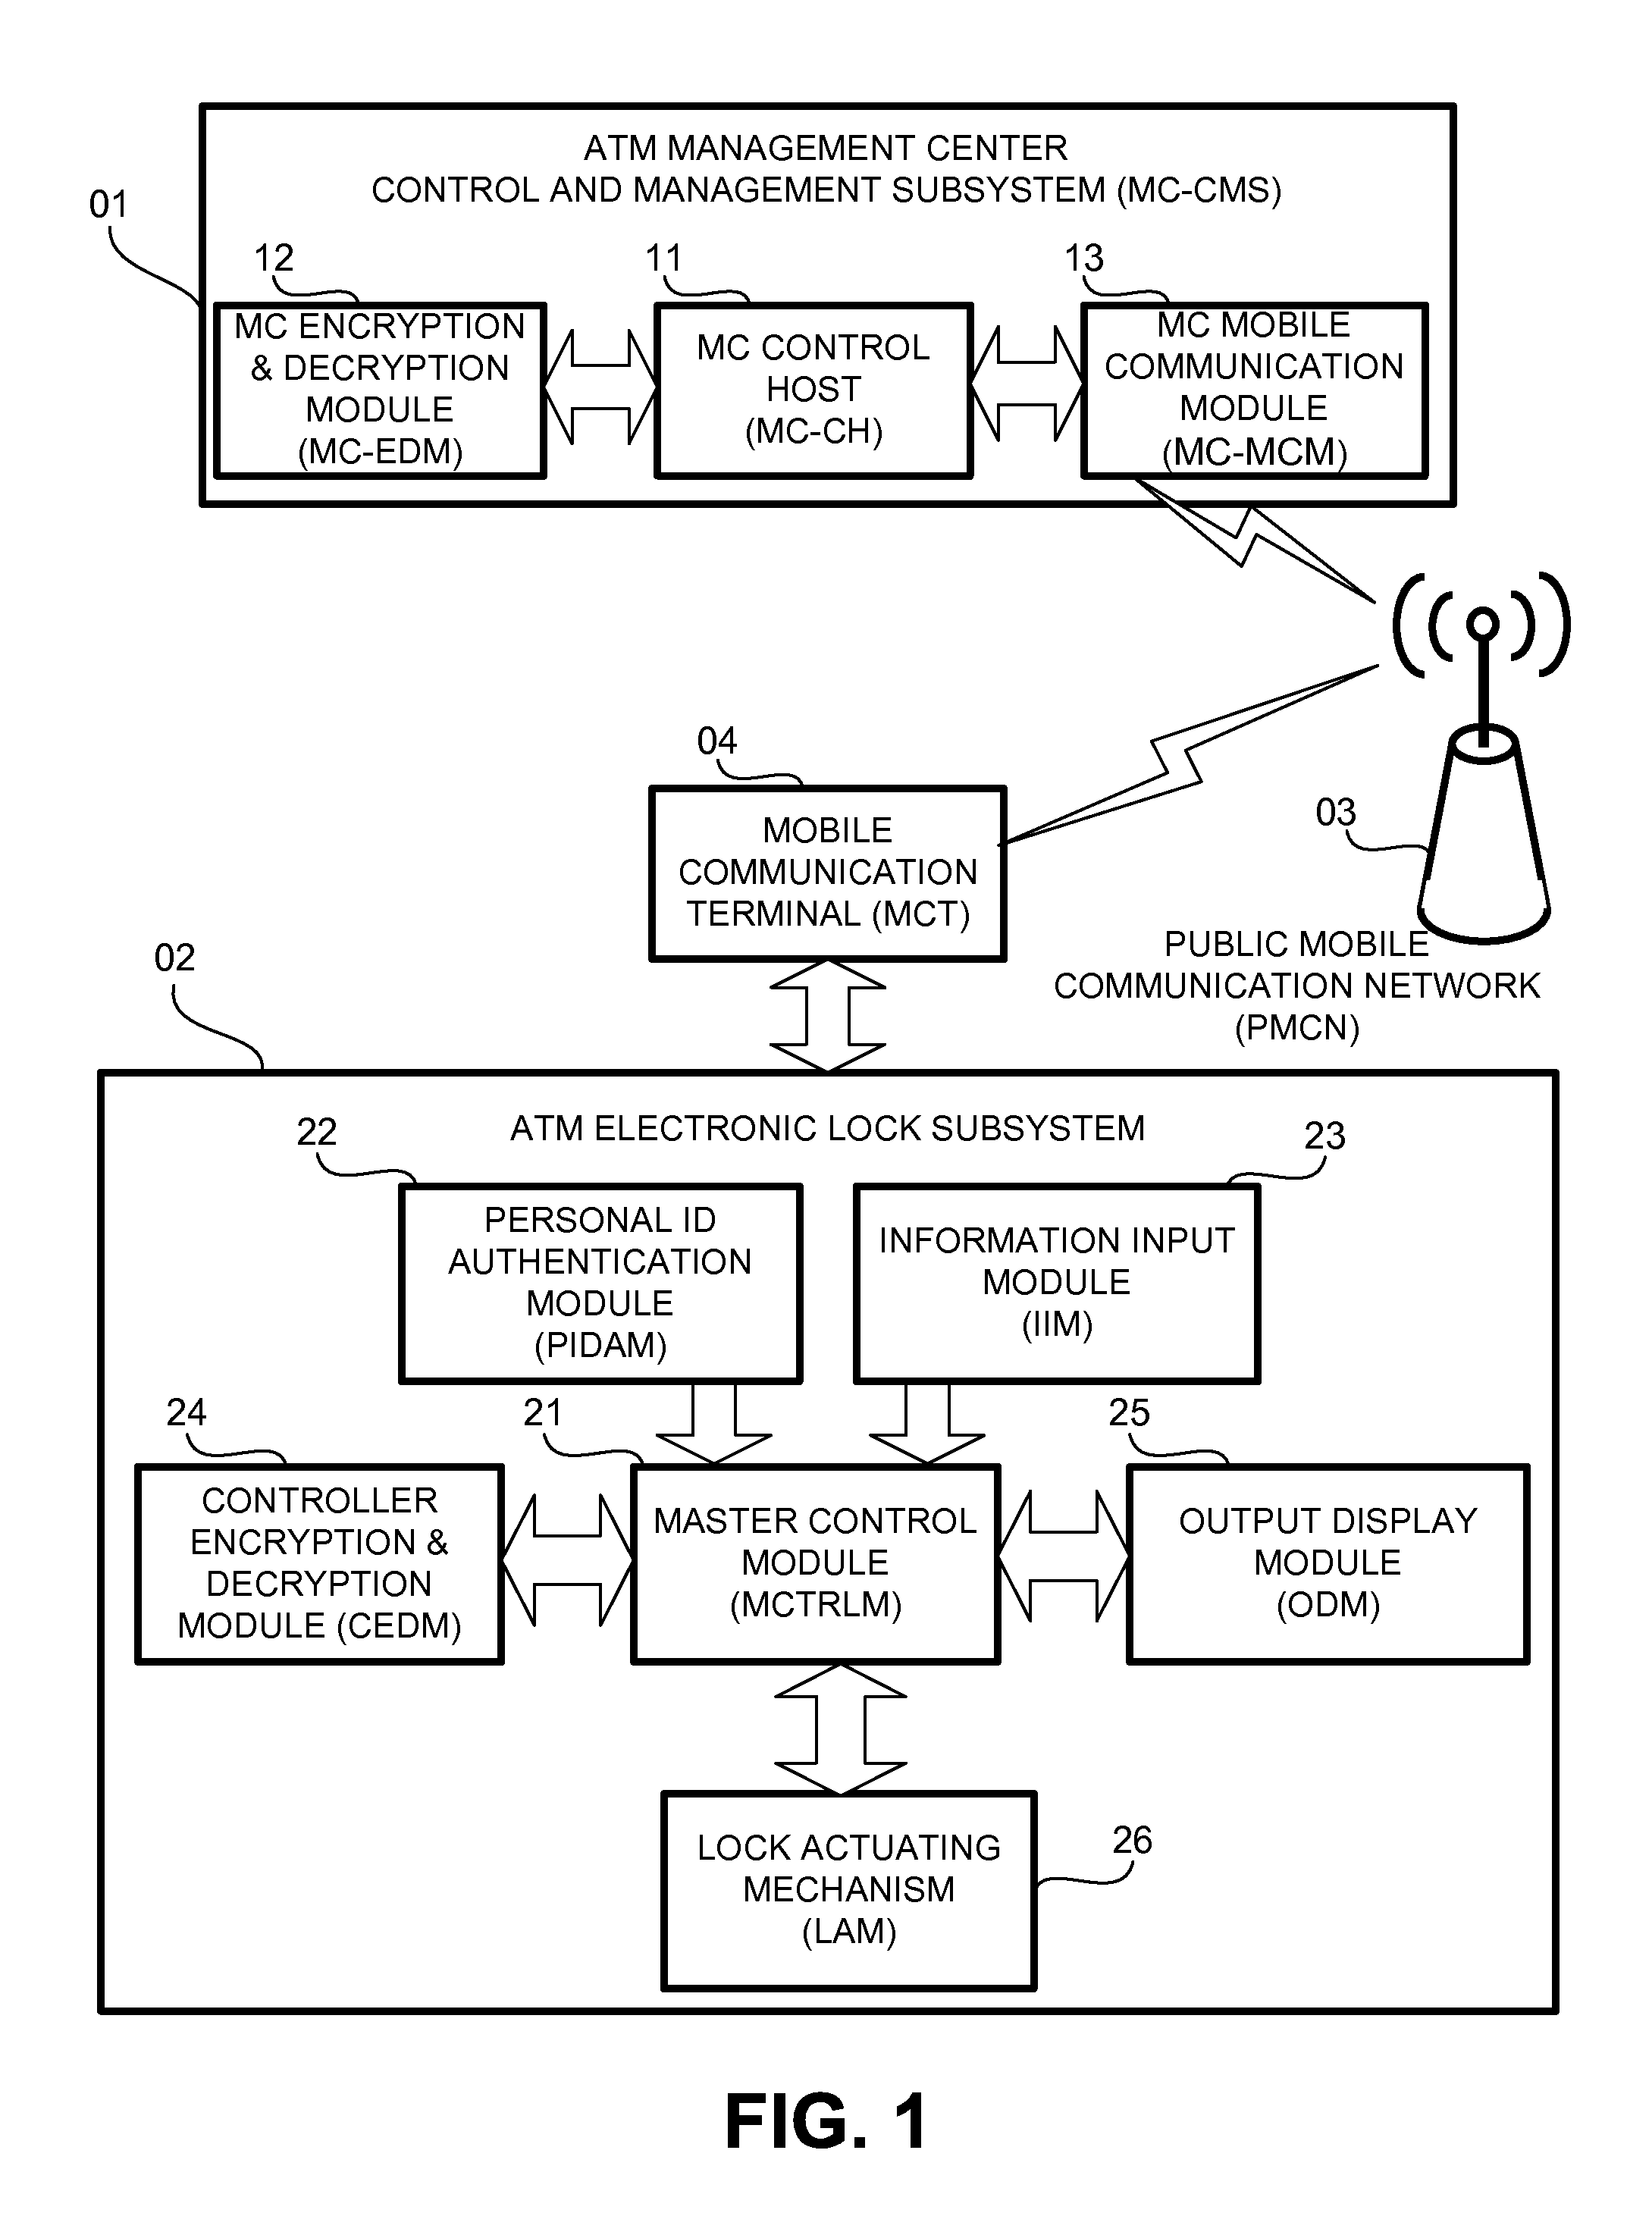 System and method for an ATM electronic lock system